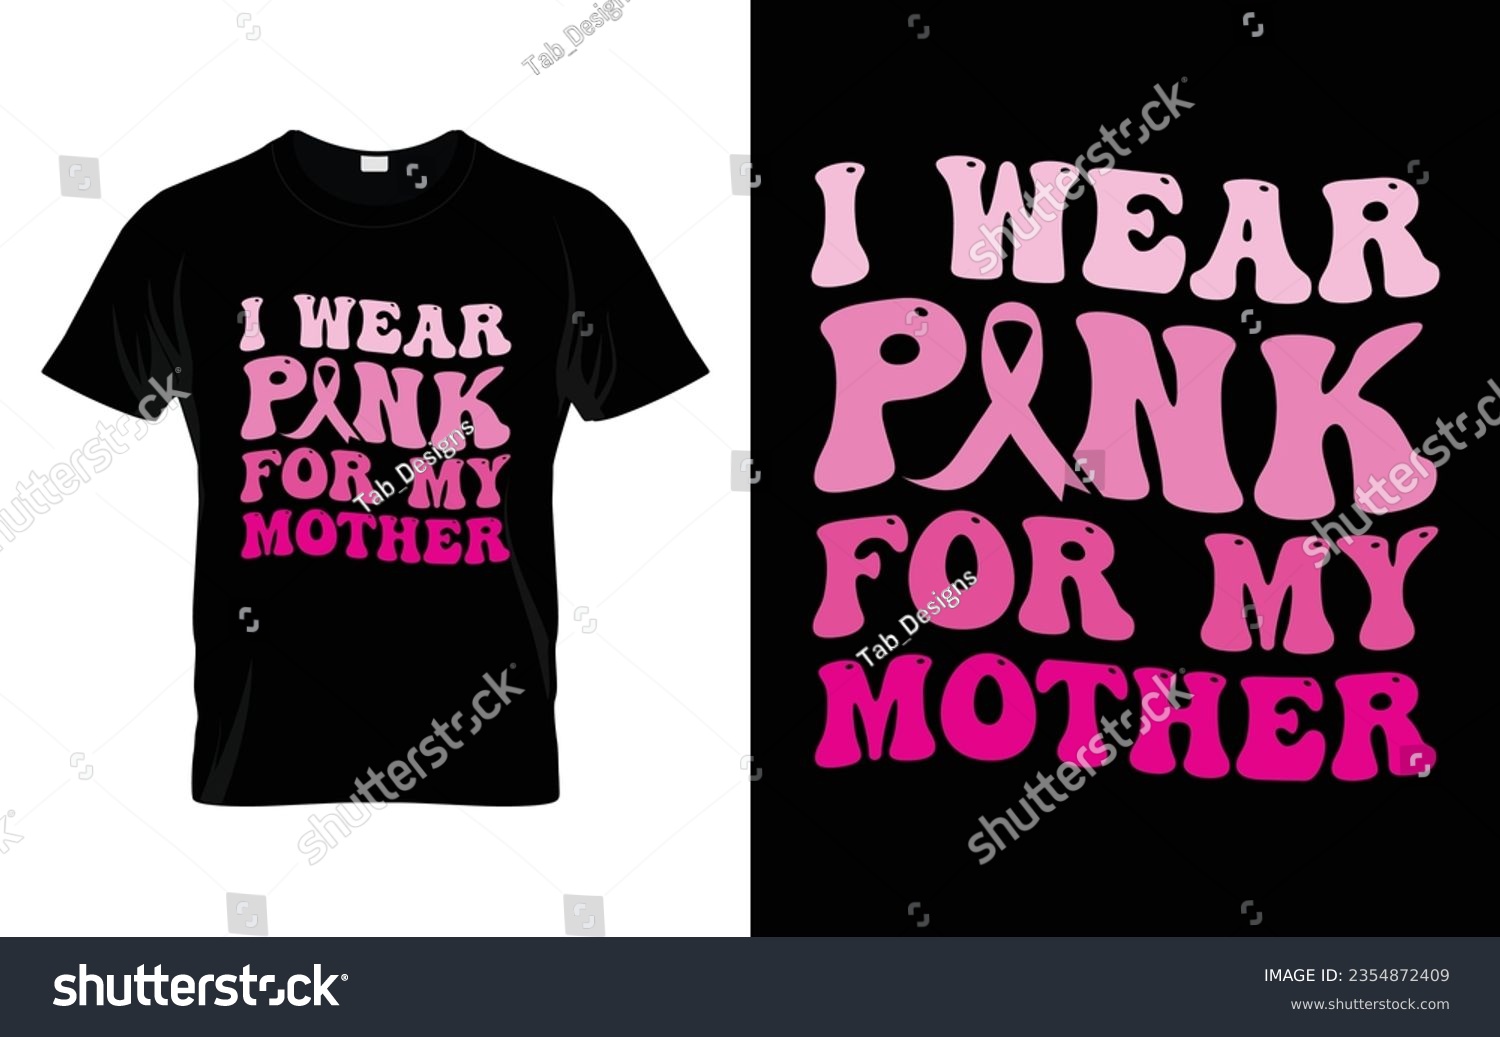 SVG of I wear pink for my Mother pink ribbon Groovy Breast Cancer Awareness Month T shirt Design || Breast Cancer Awareness Groovy t shirt design. svg